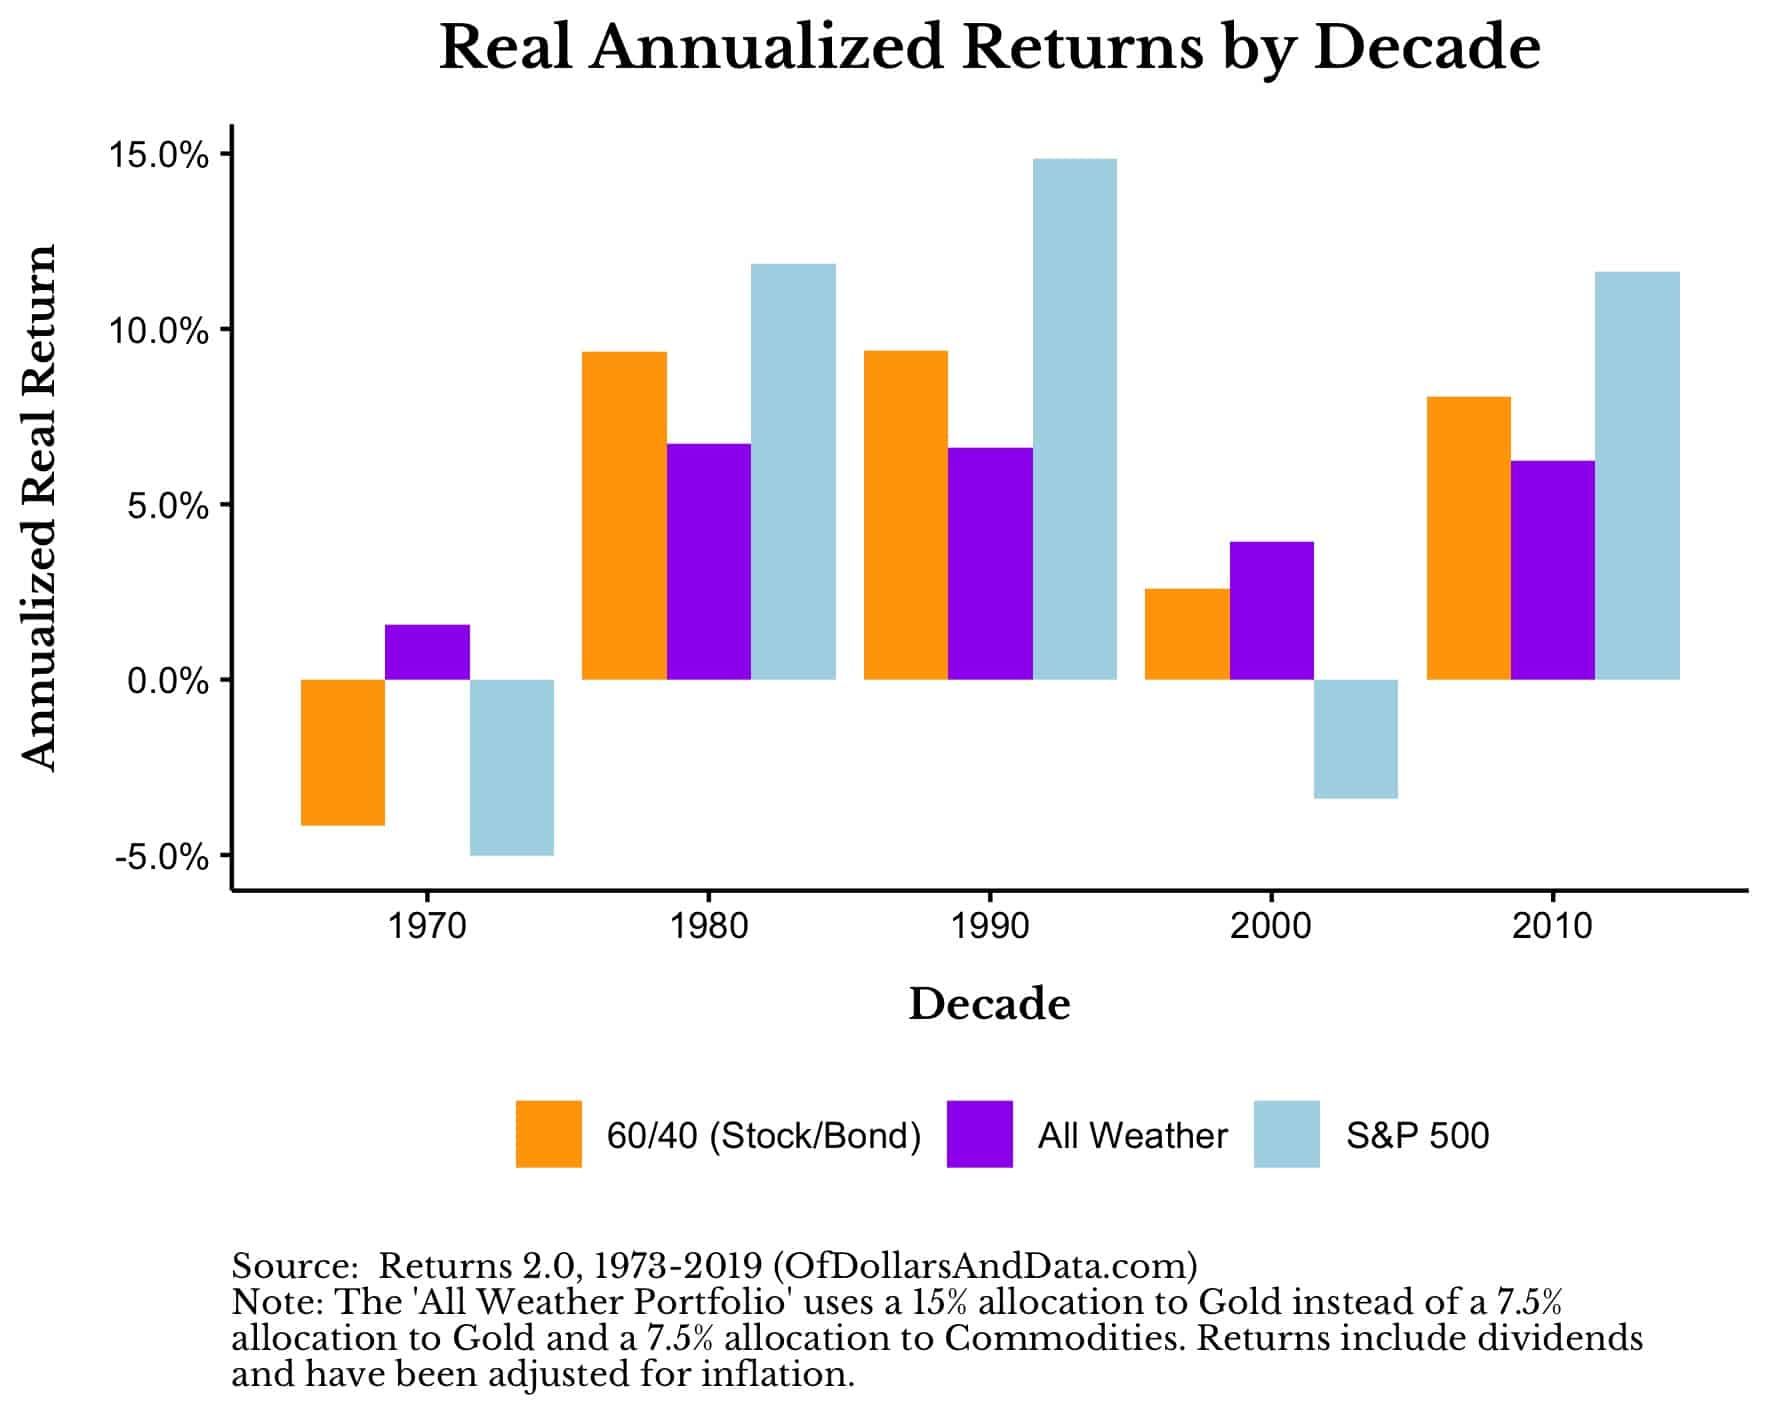 Real annualized returns by decade foe the 60/40, the All Weather Portfolio, and the S&P 500 from 1970 until 2010.